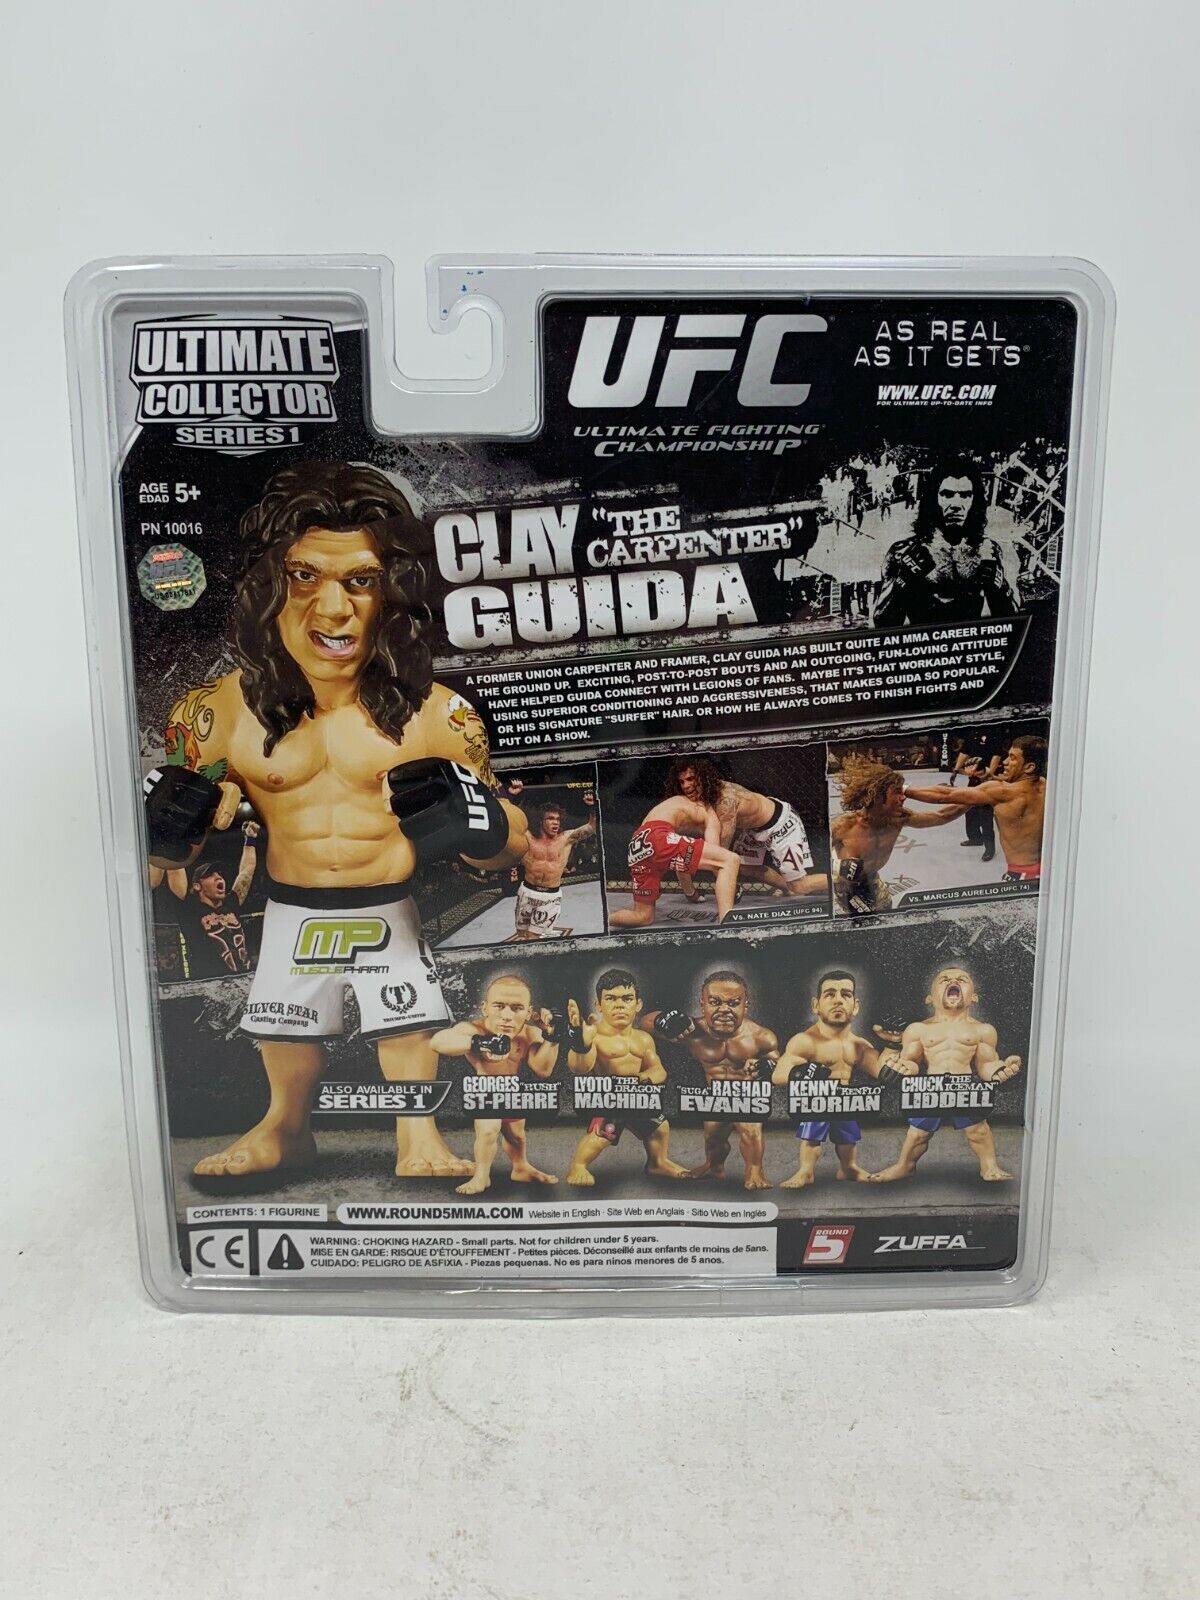 Round 5 UFC Clay “The Carpenter” Guida Ultimate Collector Series 1 Action Figure